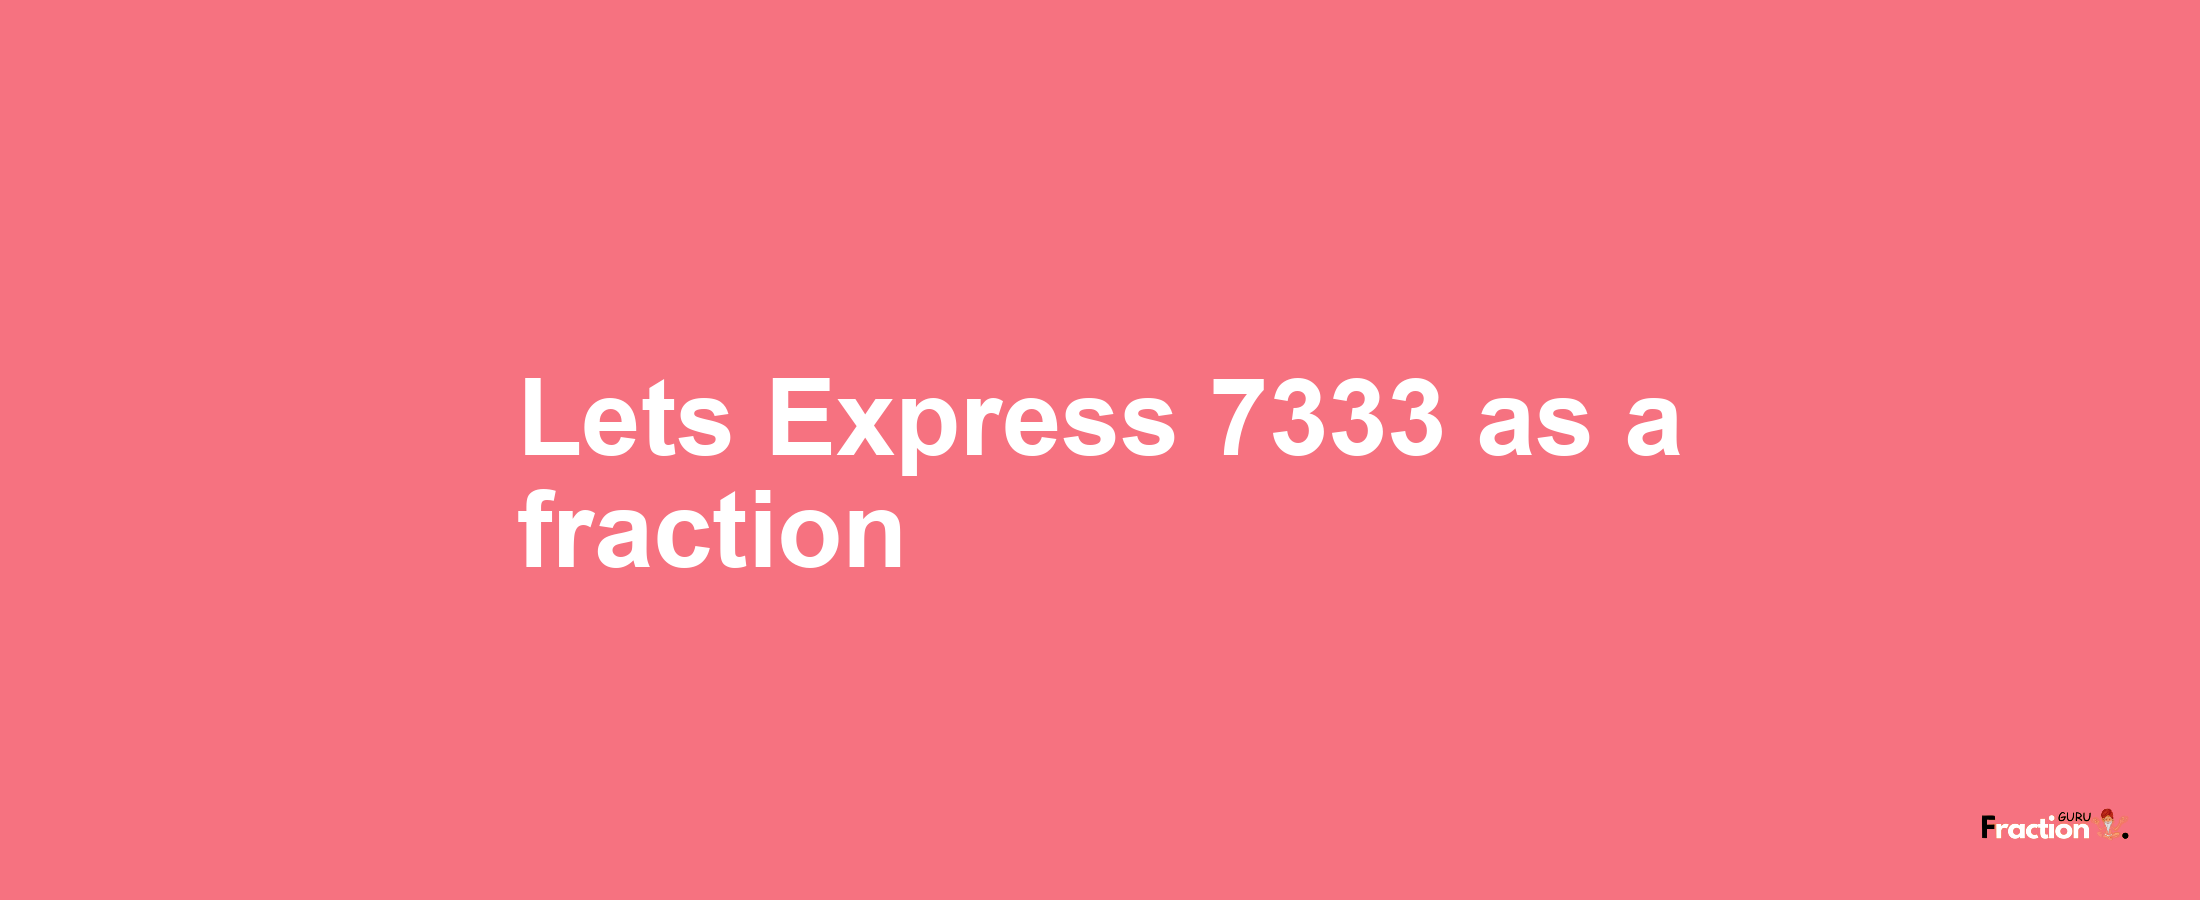 Lets Express 7333 as afraction